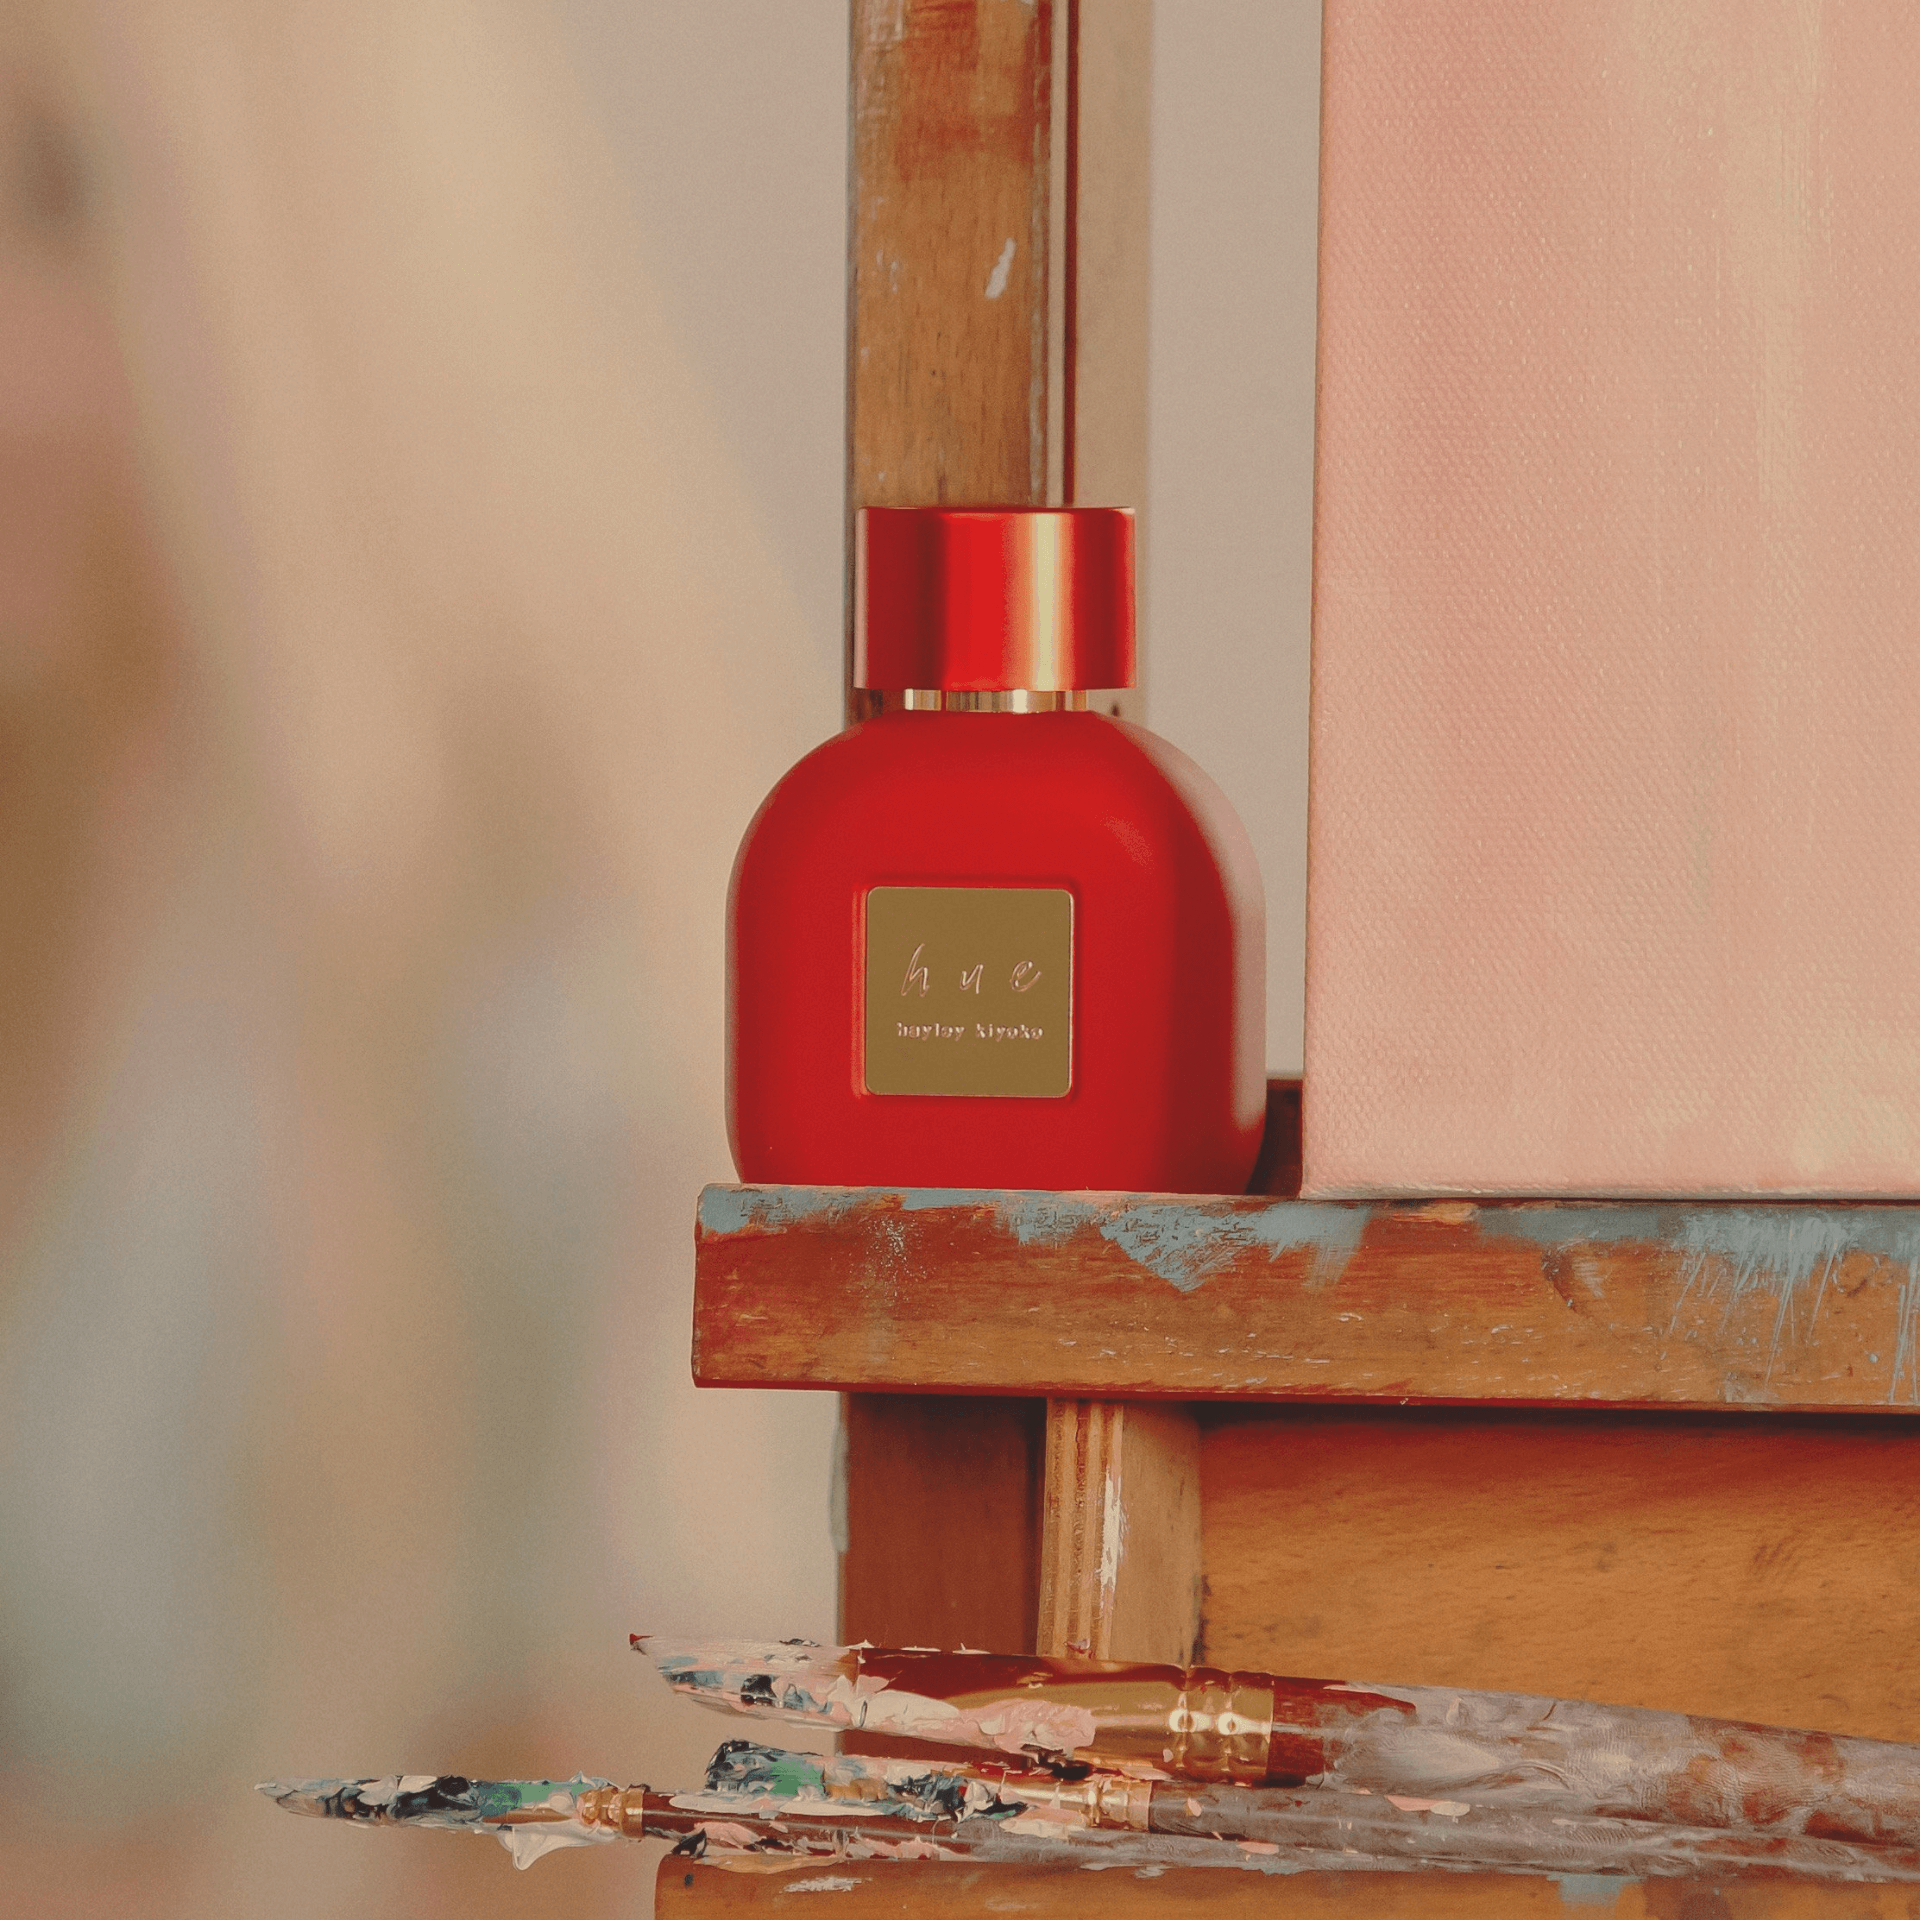 Hue by Hayley perfume created by female celebrity, Hayley Kiyoko. The fragrance is perched on wooden stand with paint brushes strategically placed around it.